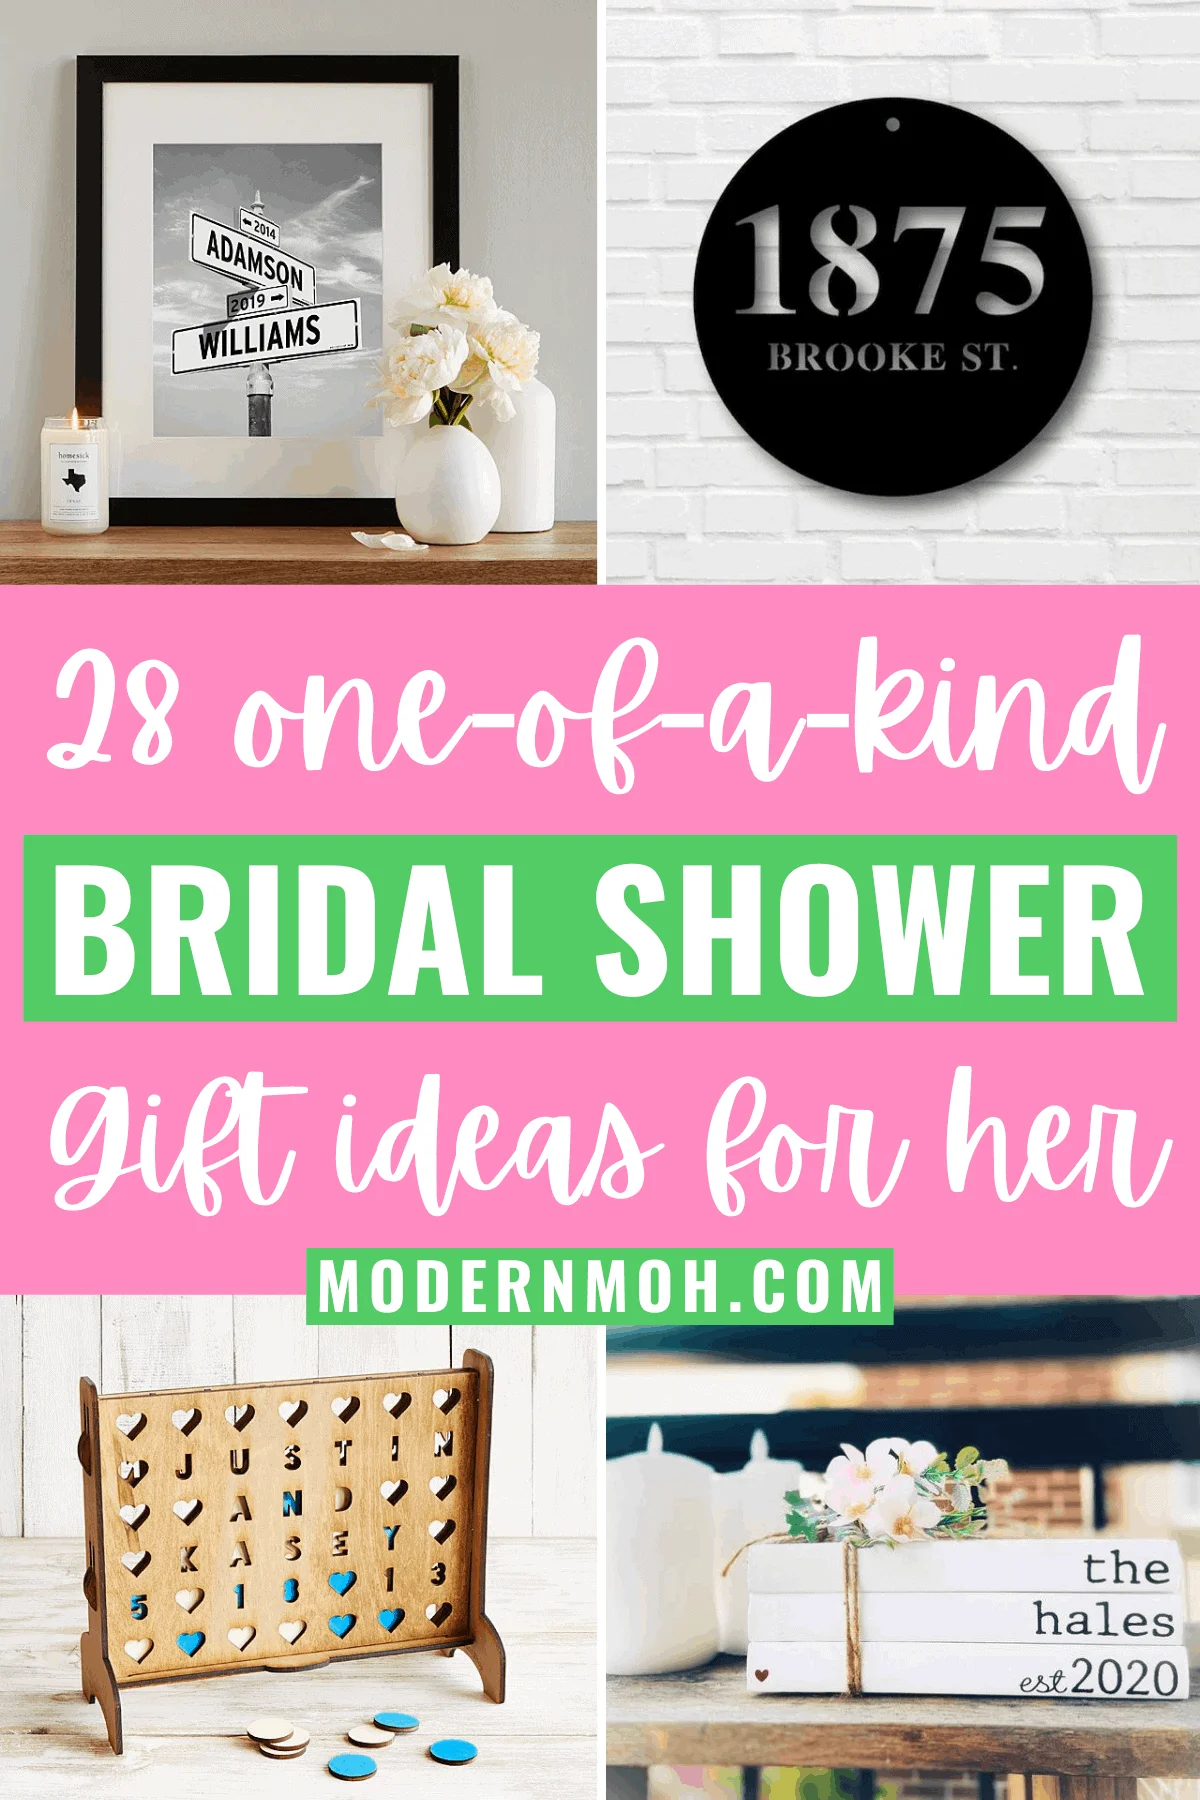 28 Bridal Shower Gifts That Aren\'t on the Couple\'s Registry